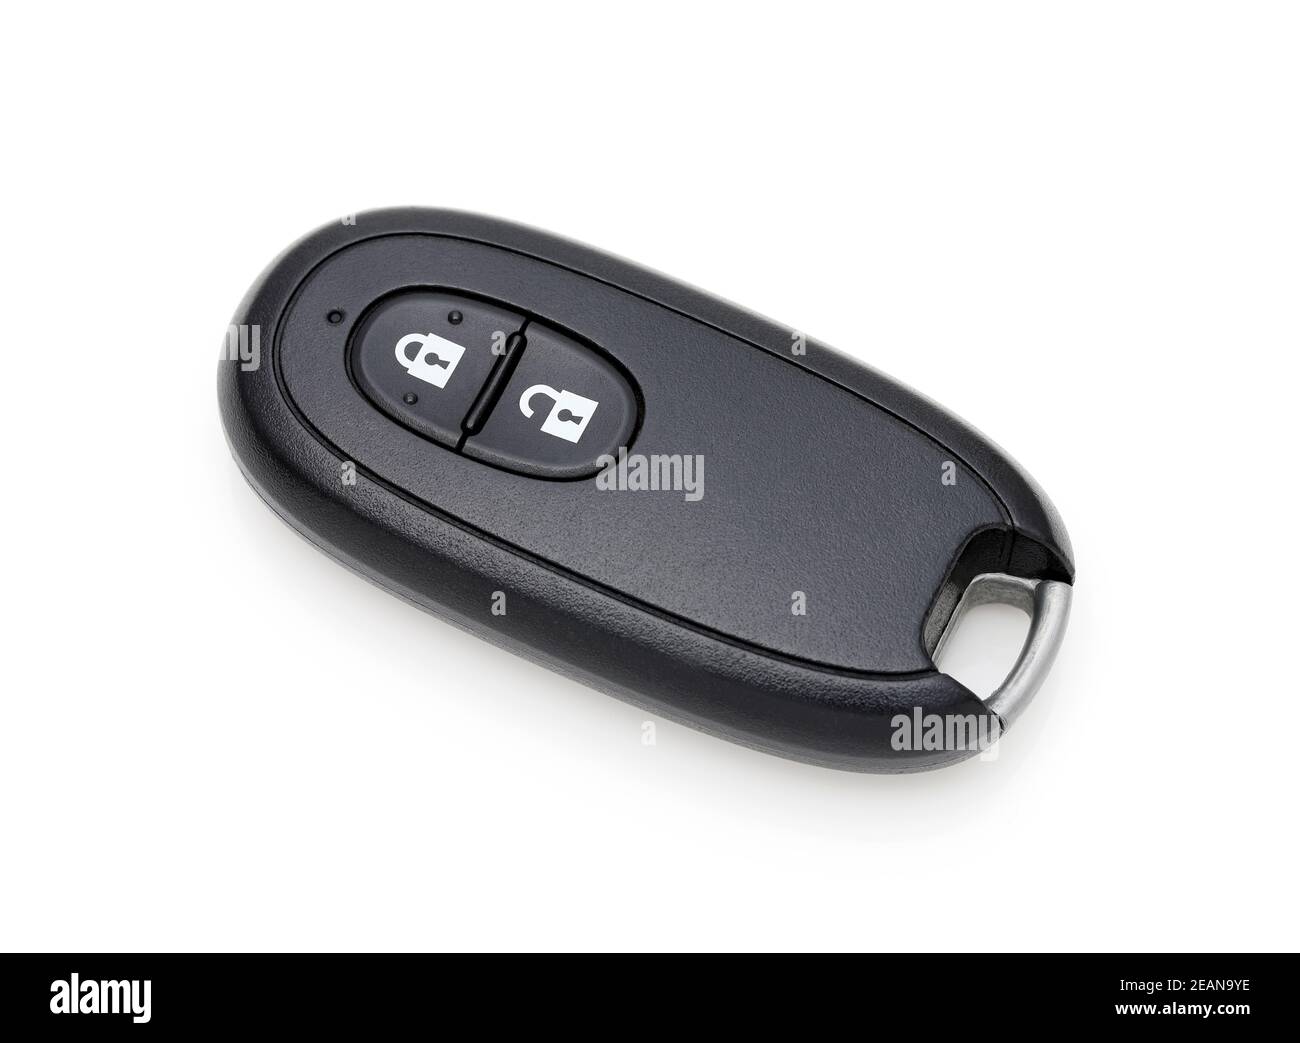 Car vehicle modern black key remote control have front button and back, isolated on white background Stock Photo